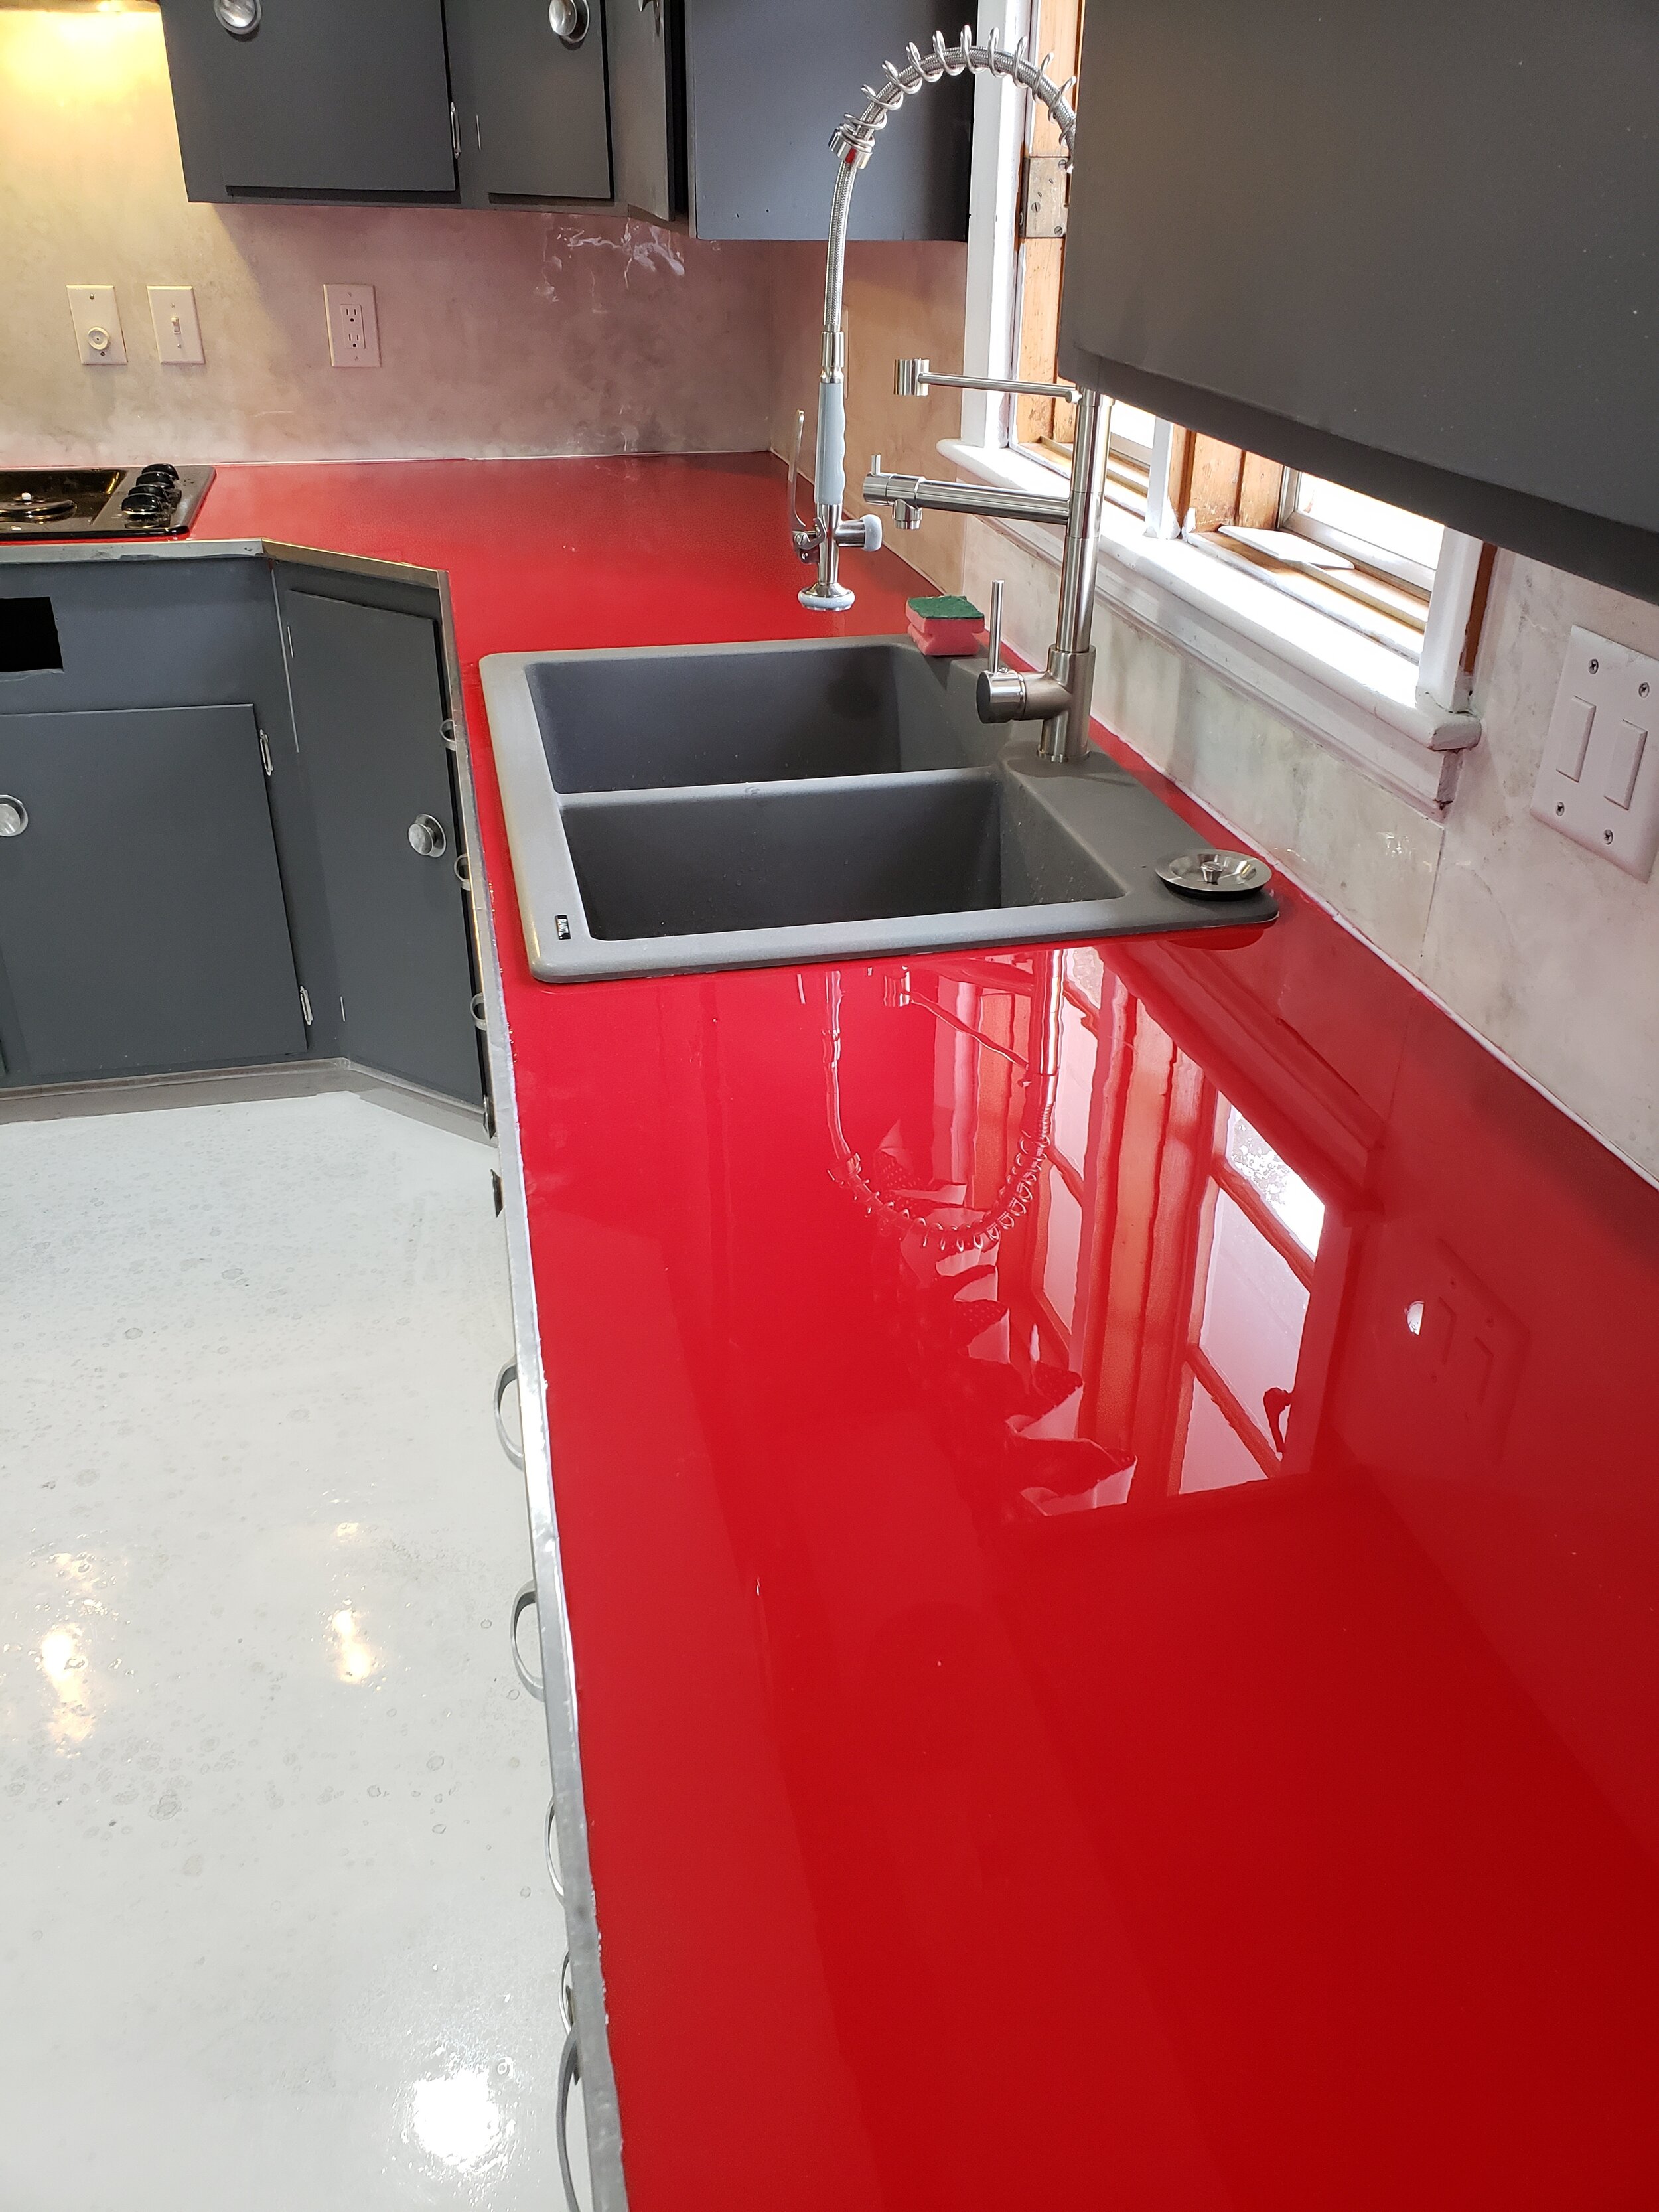 Countertops Cool Epoxy Surfaces By, Countertops That Fit Over Existing Countertops